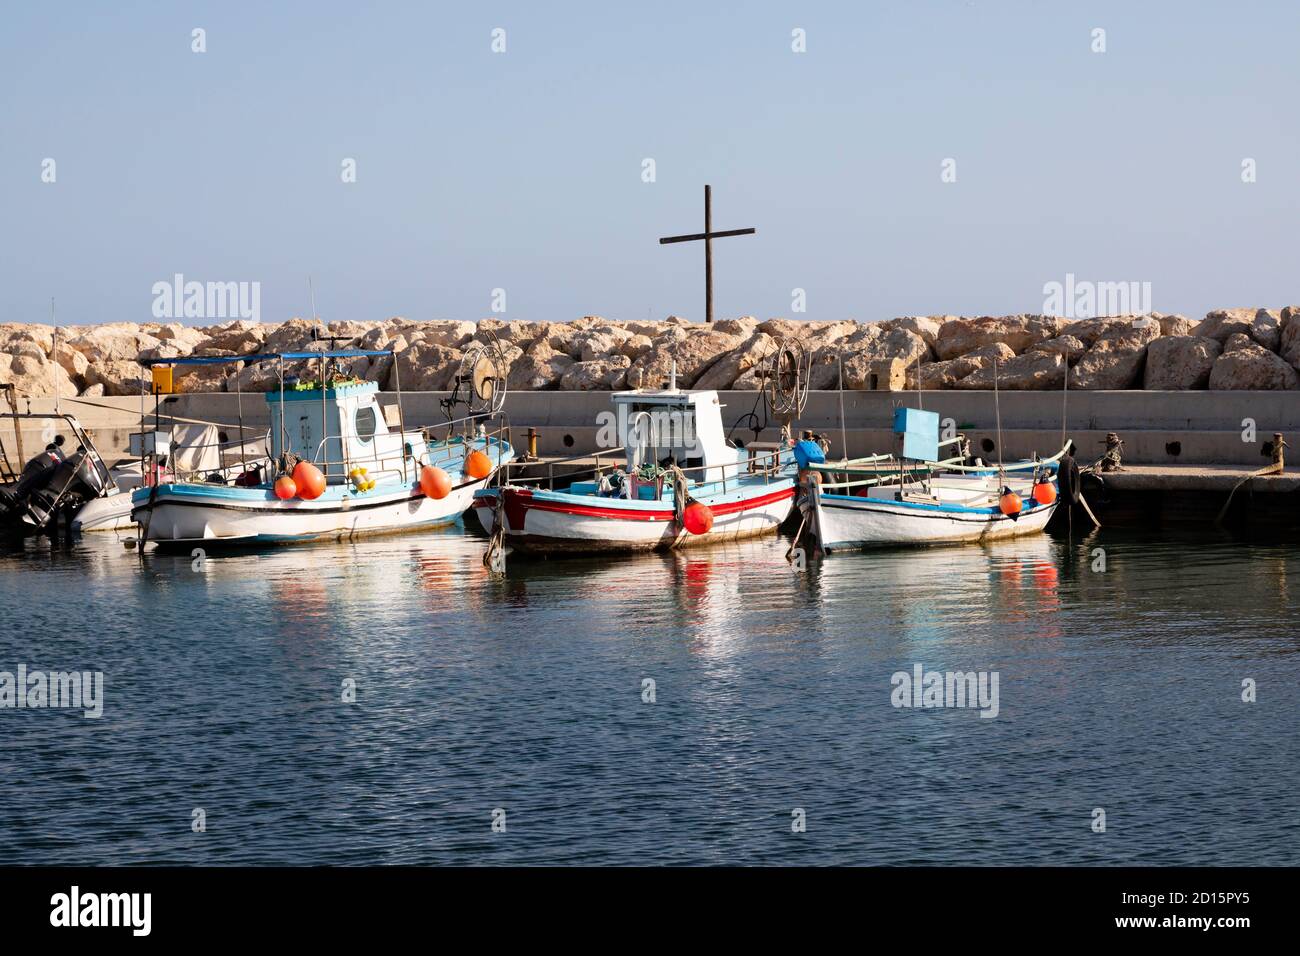 Traditional Cypriot fishing boats moored in Xylotymvou fishing shelter, Dhekelia Sovereign Base Area, Larnaca, Cyprus Stock Photo